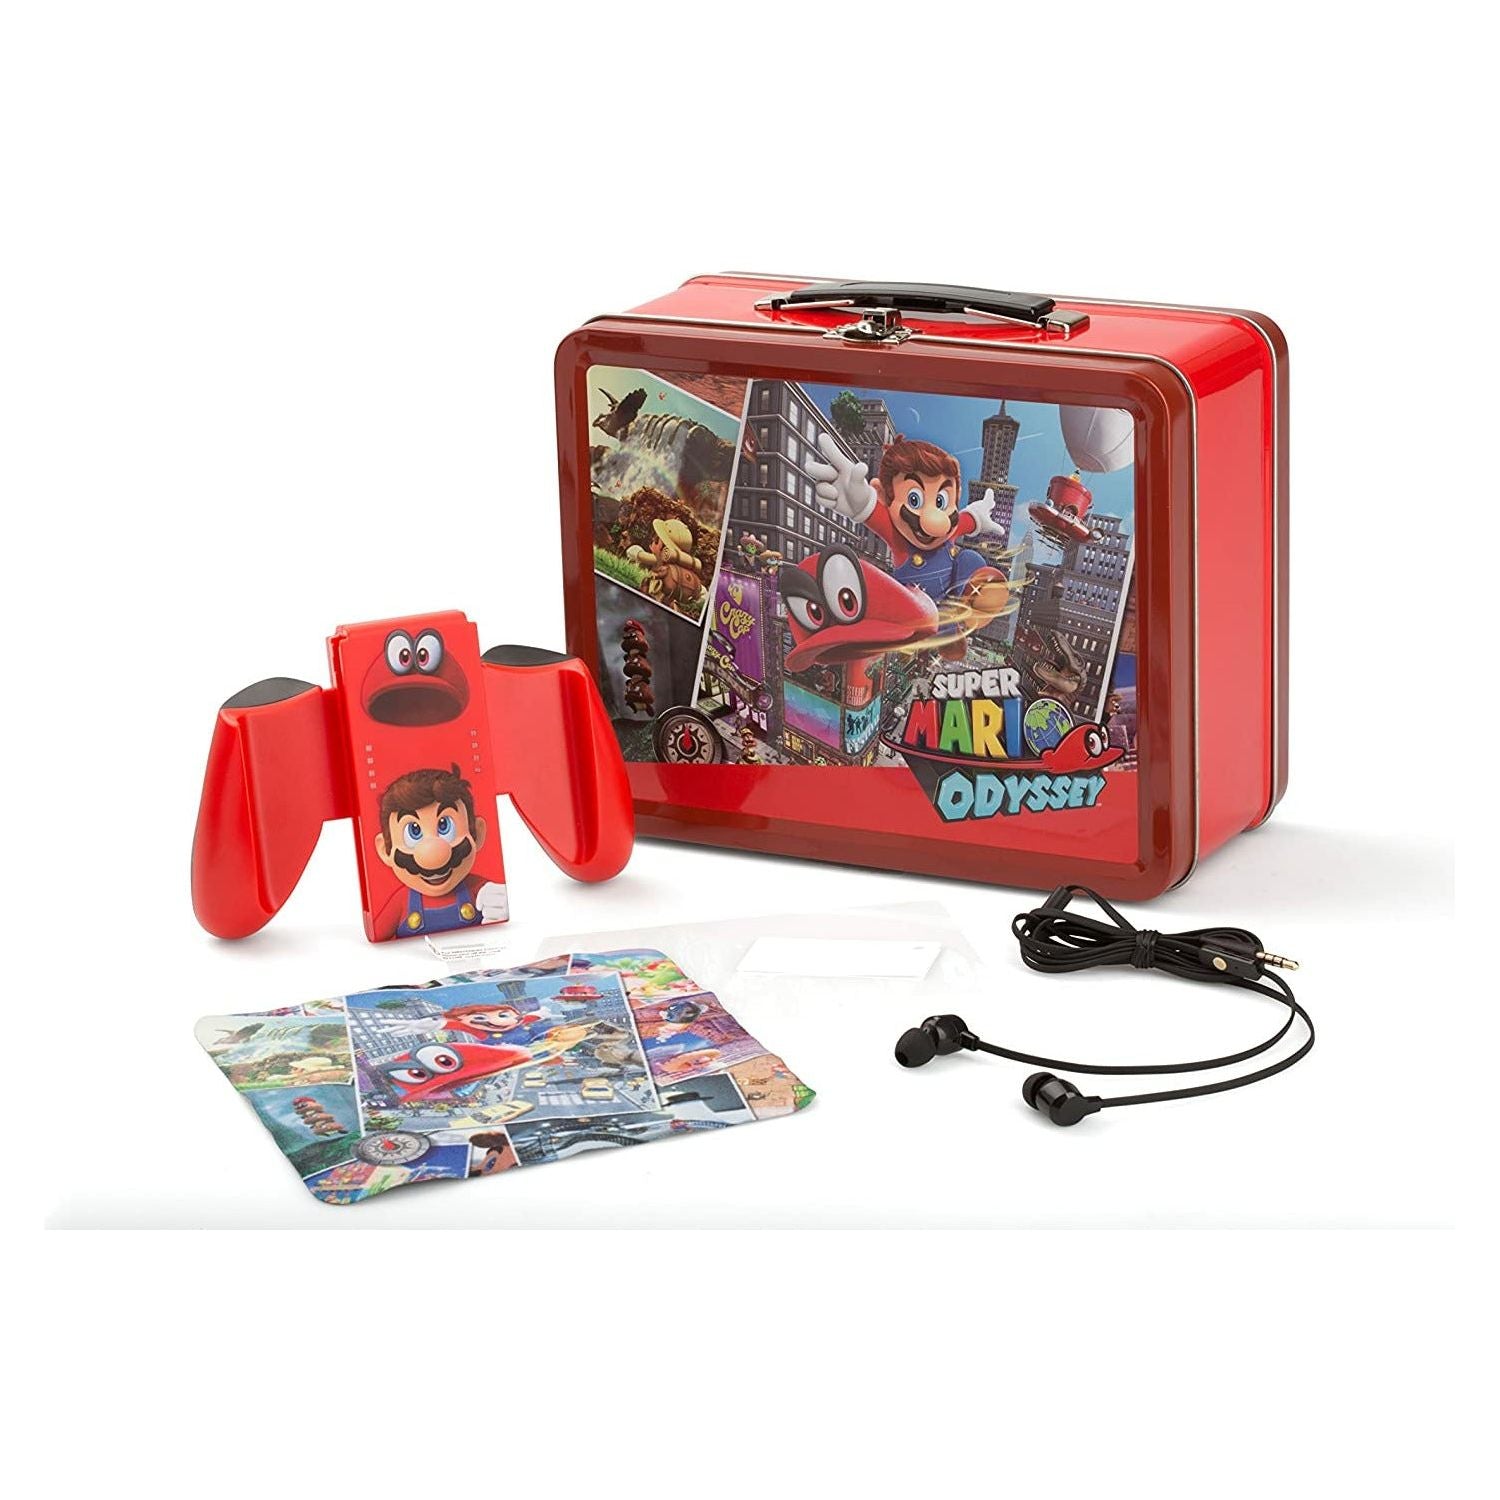 Super Mario Odyssey Collectible Lunchbox Kit